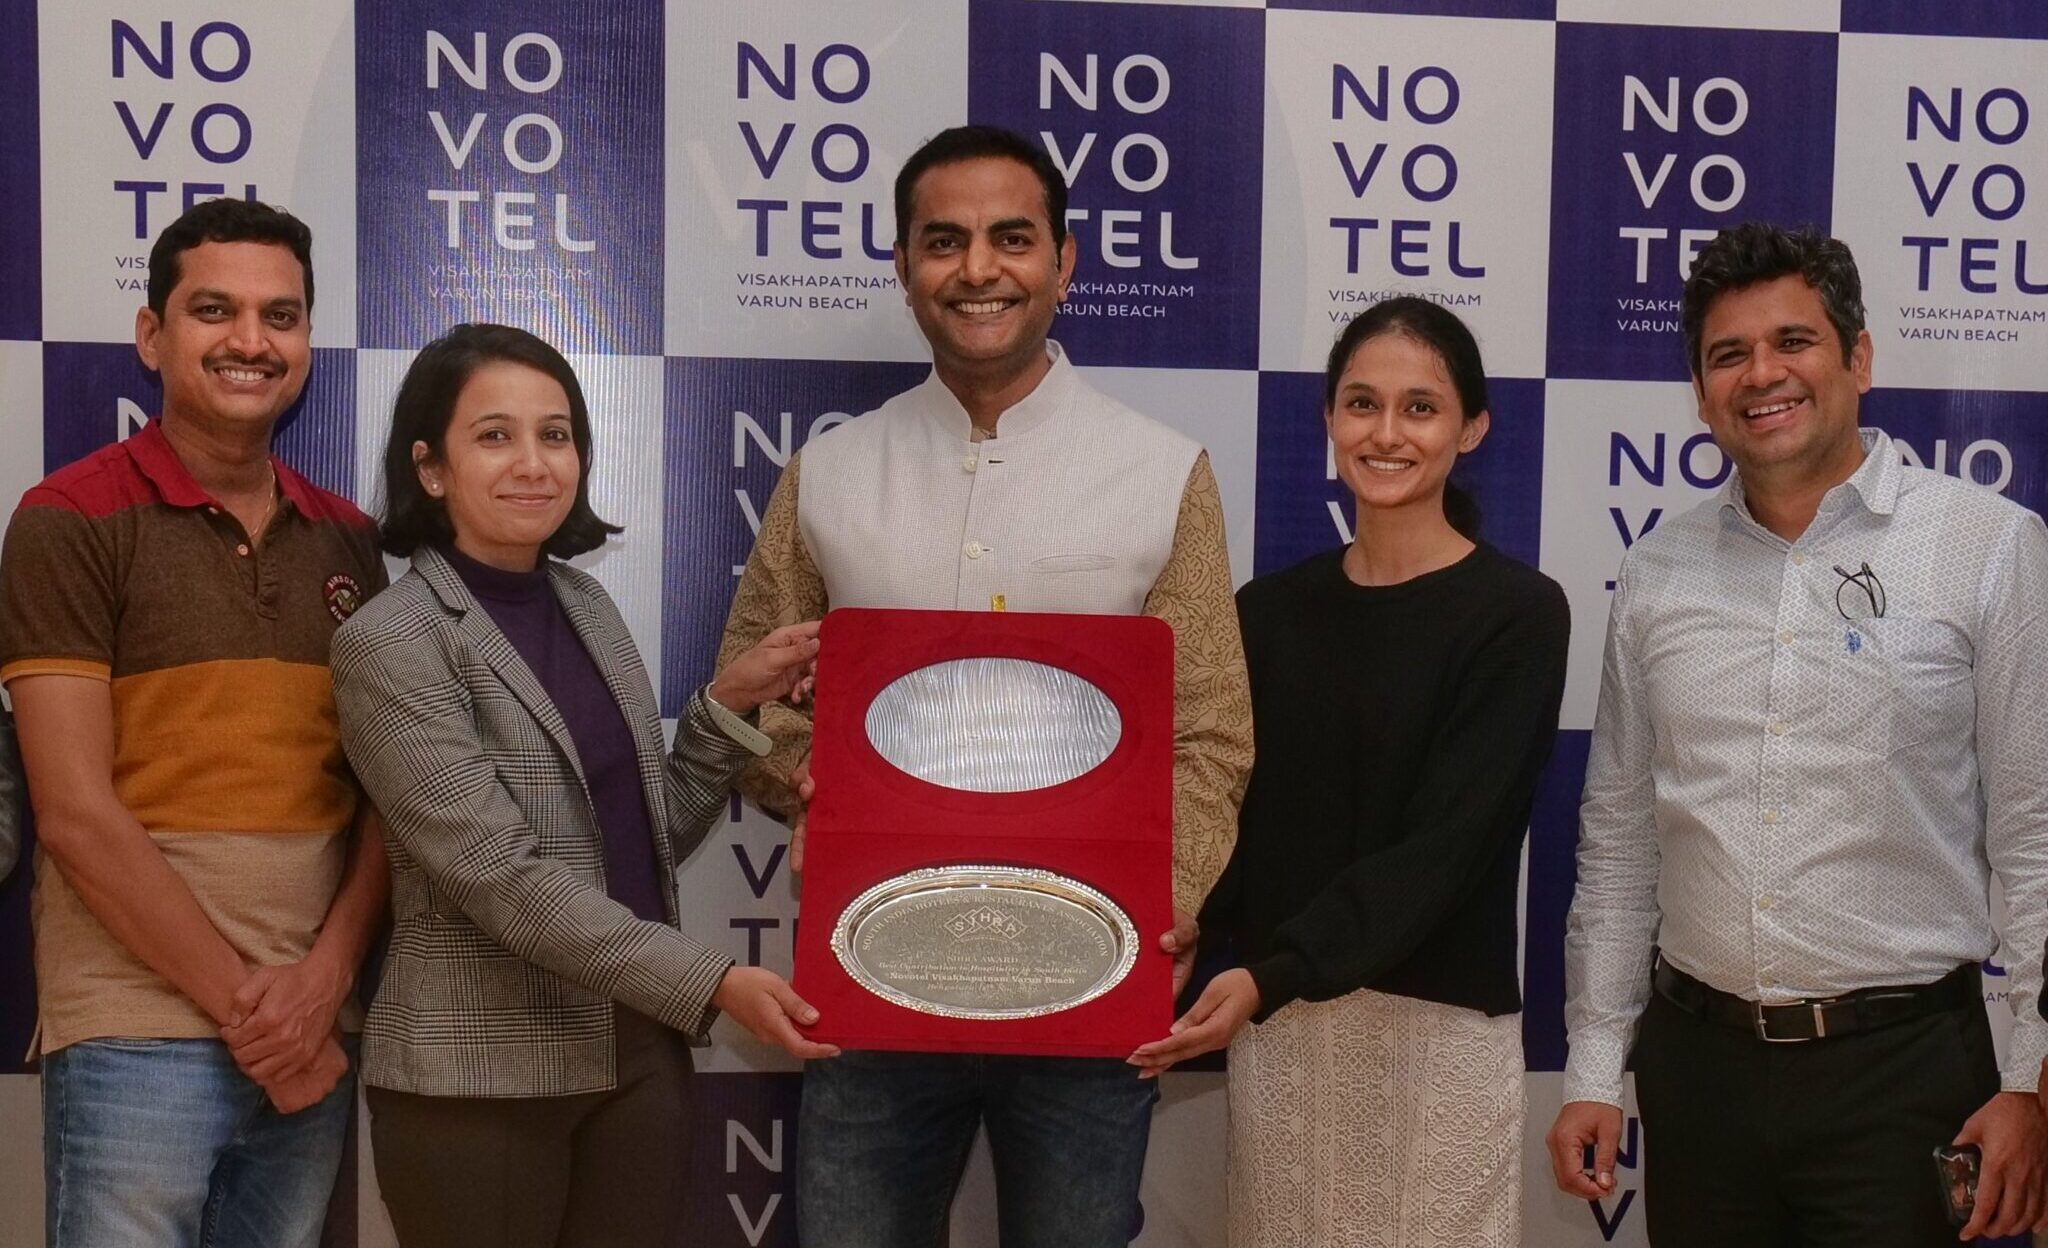 Novotel Visakhapatnam Varun Beach Bags “Best Contribution to Hospitality in South India” by SIHRA